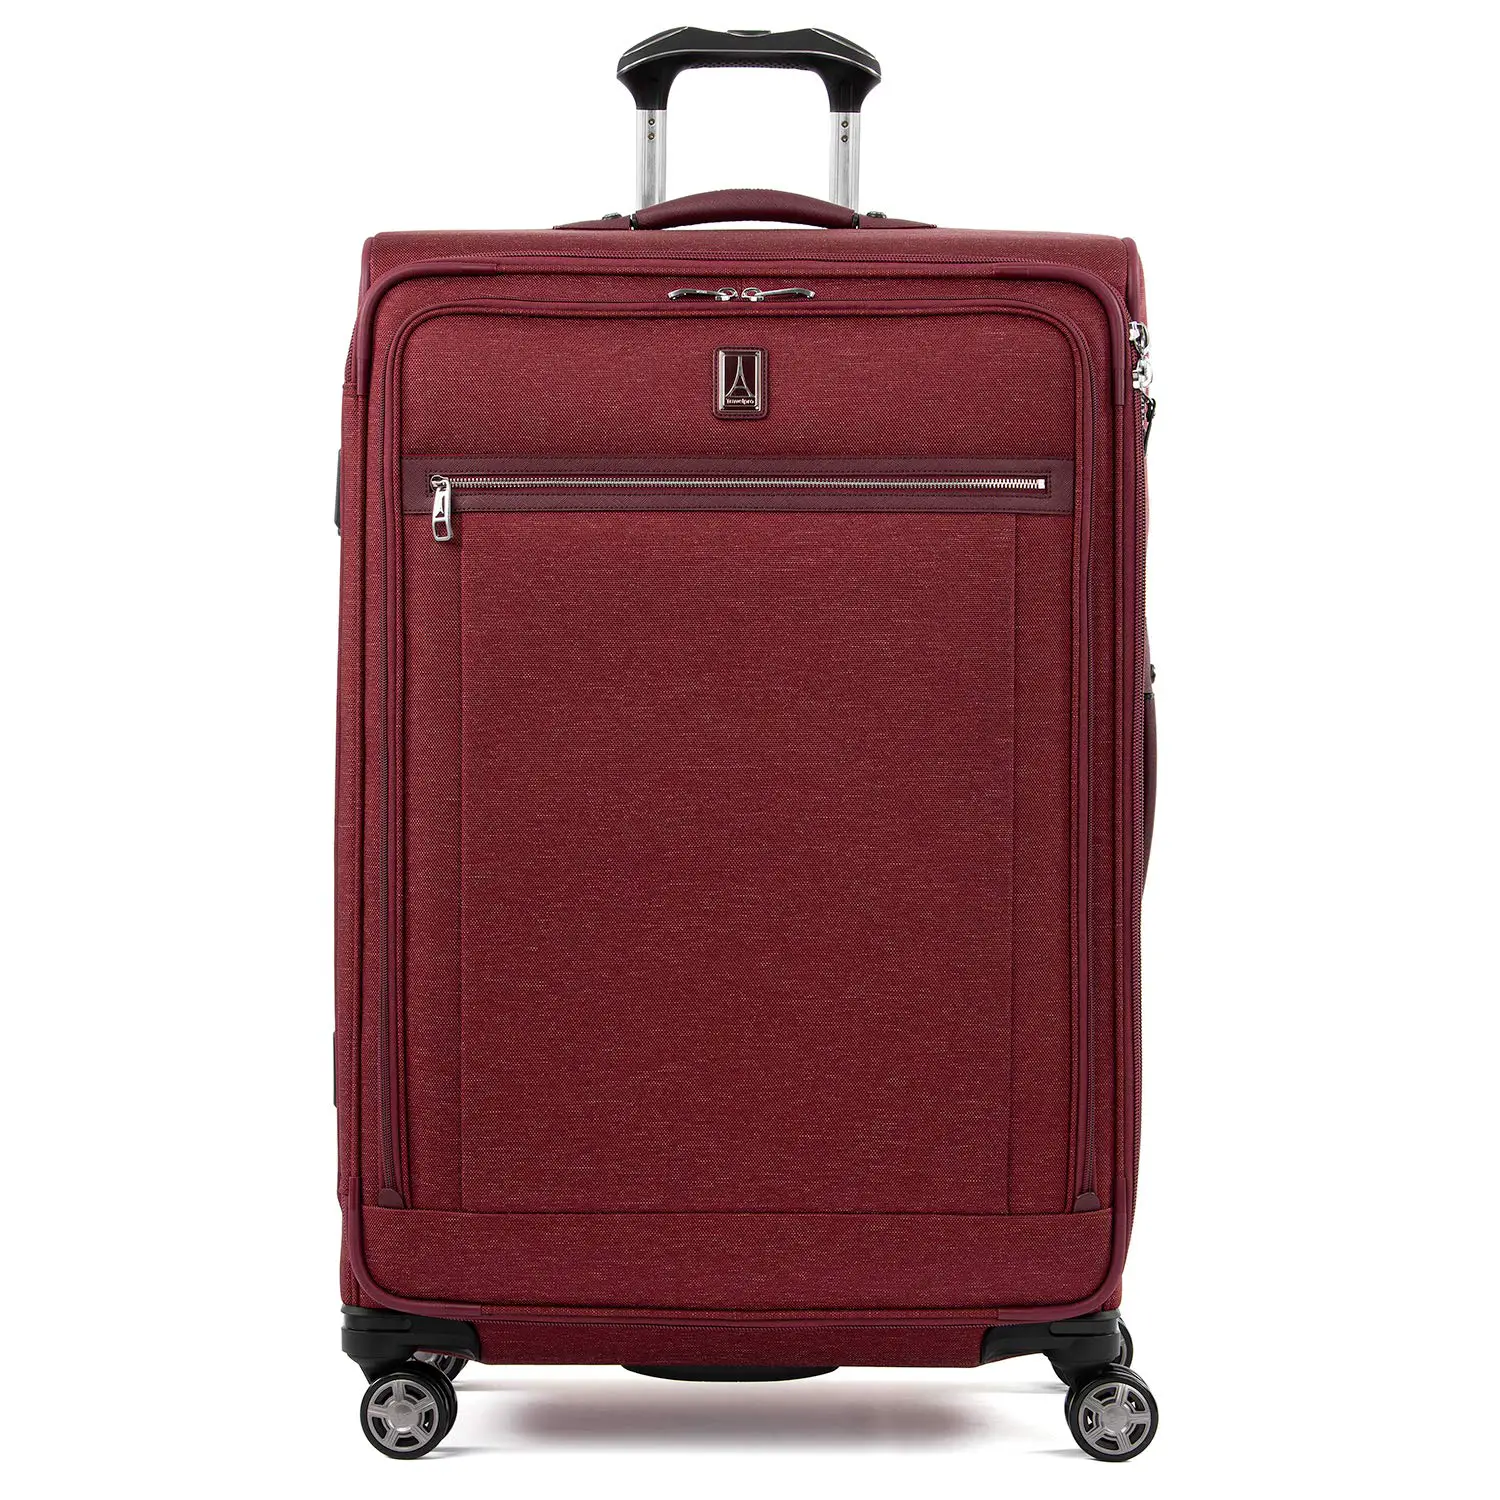 Paris Chic Style Travelpro Check In Best Travel Luggage